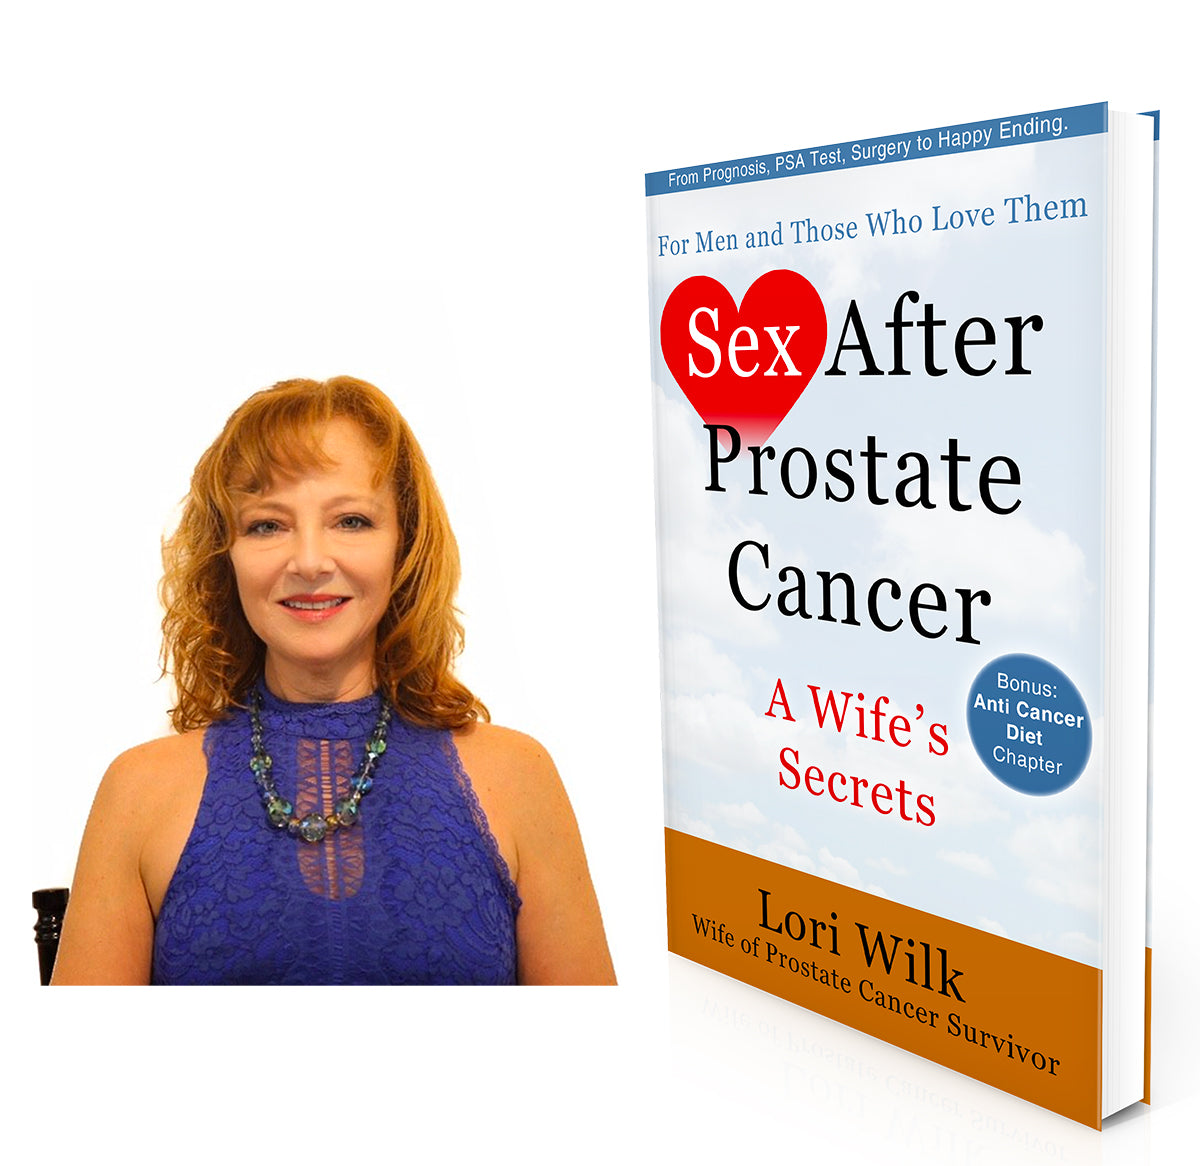 LORI WILKS THE AUTHOR OF SEX AFTER PROSTATE CANCER INTERVIEWS MARK SCHNEIDER THE CEO OF THE ELATOR